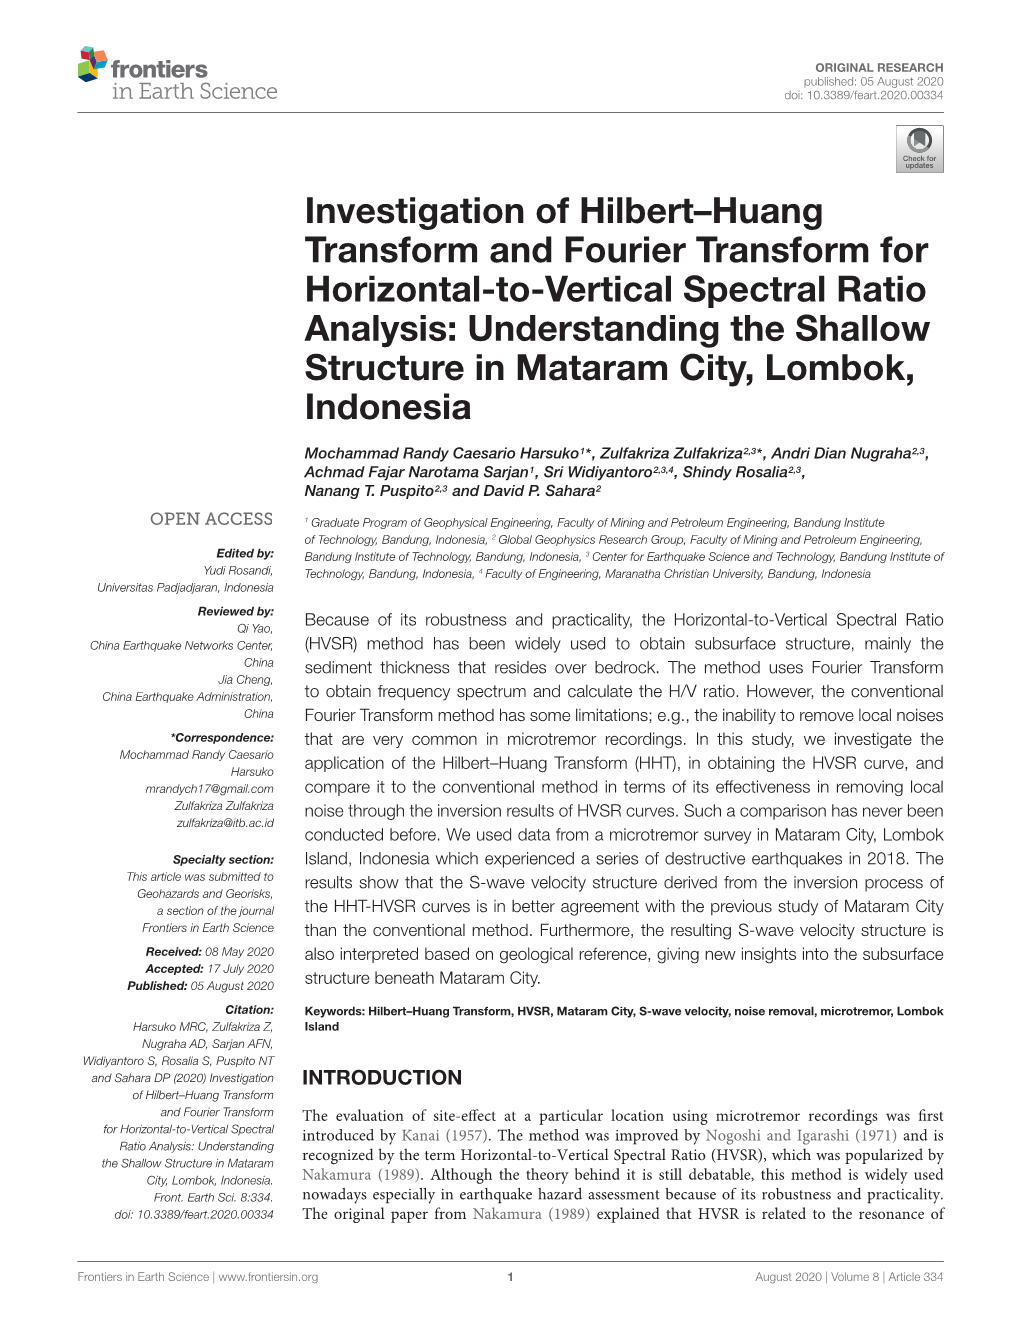 Investigation of Hilbert–Huang Transform and Fourier